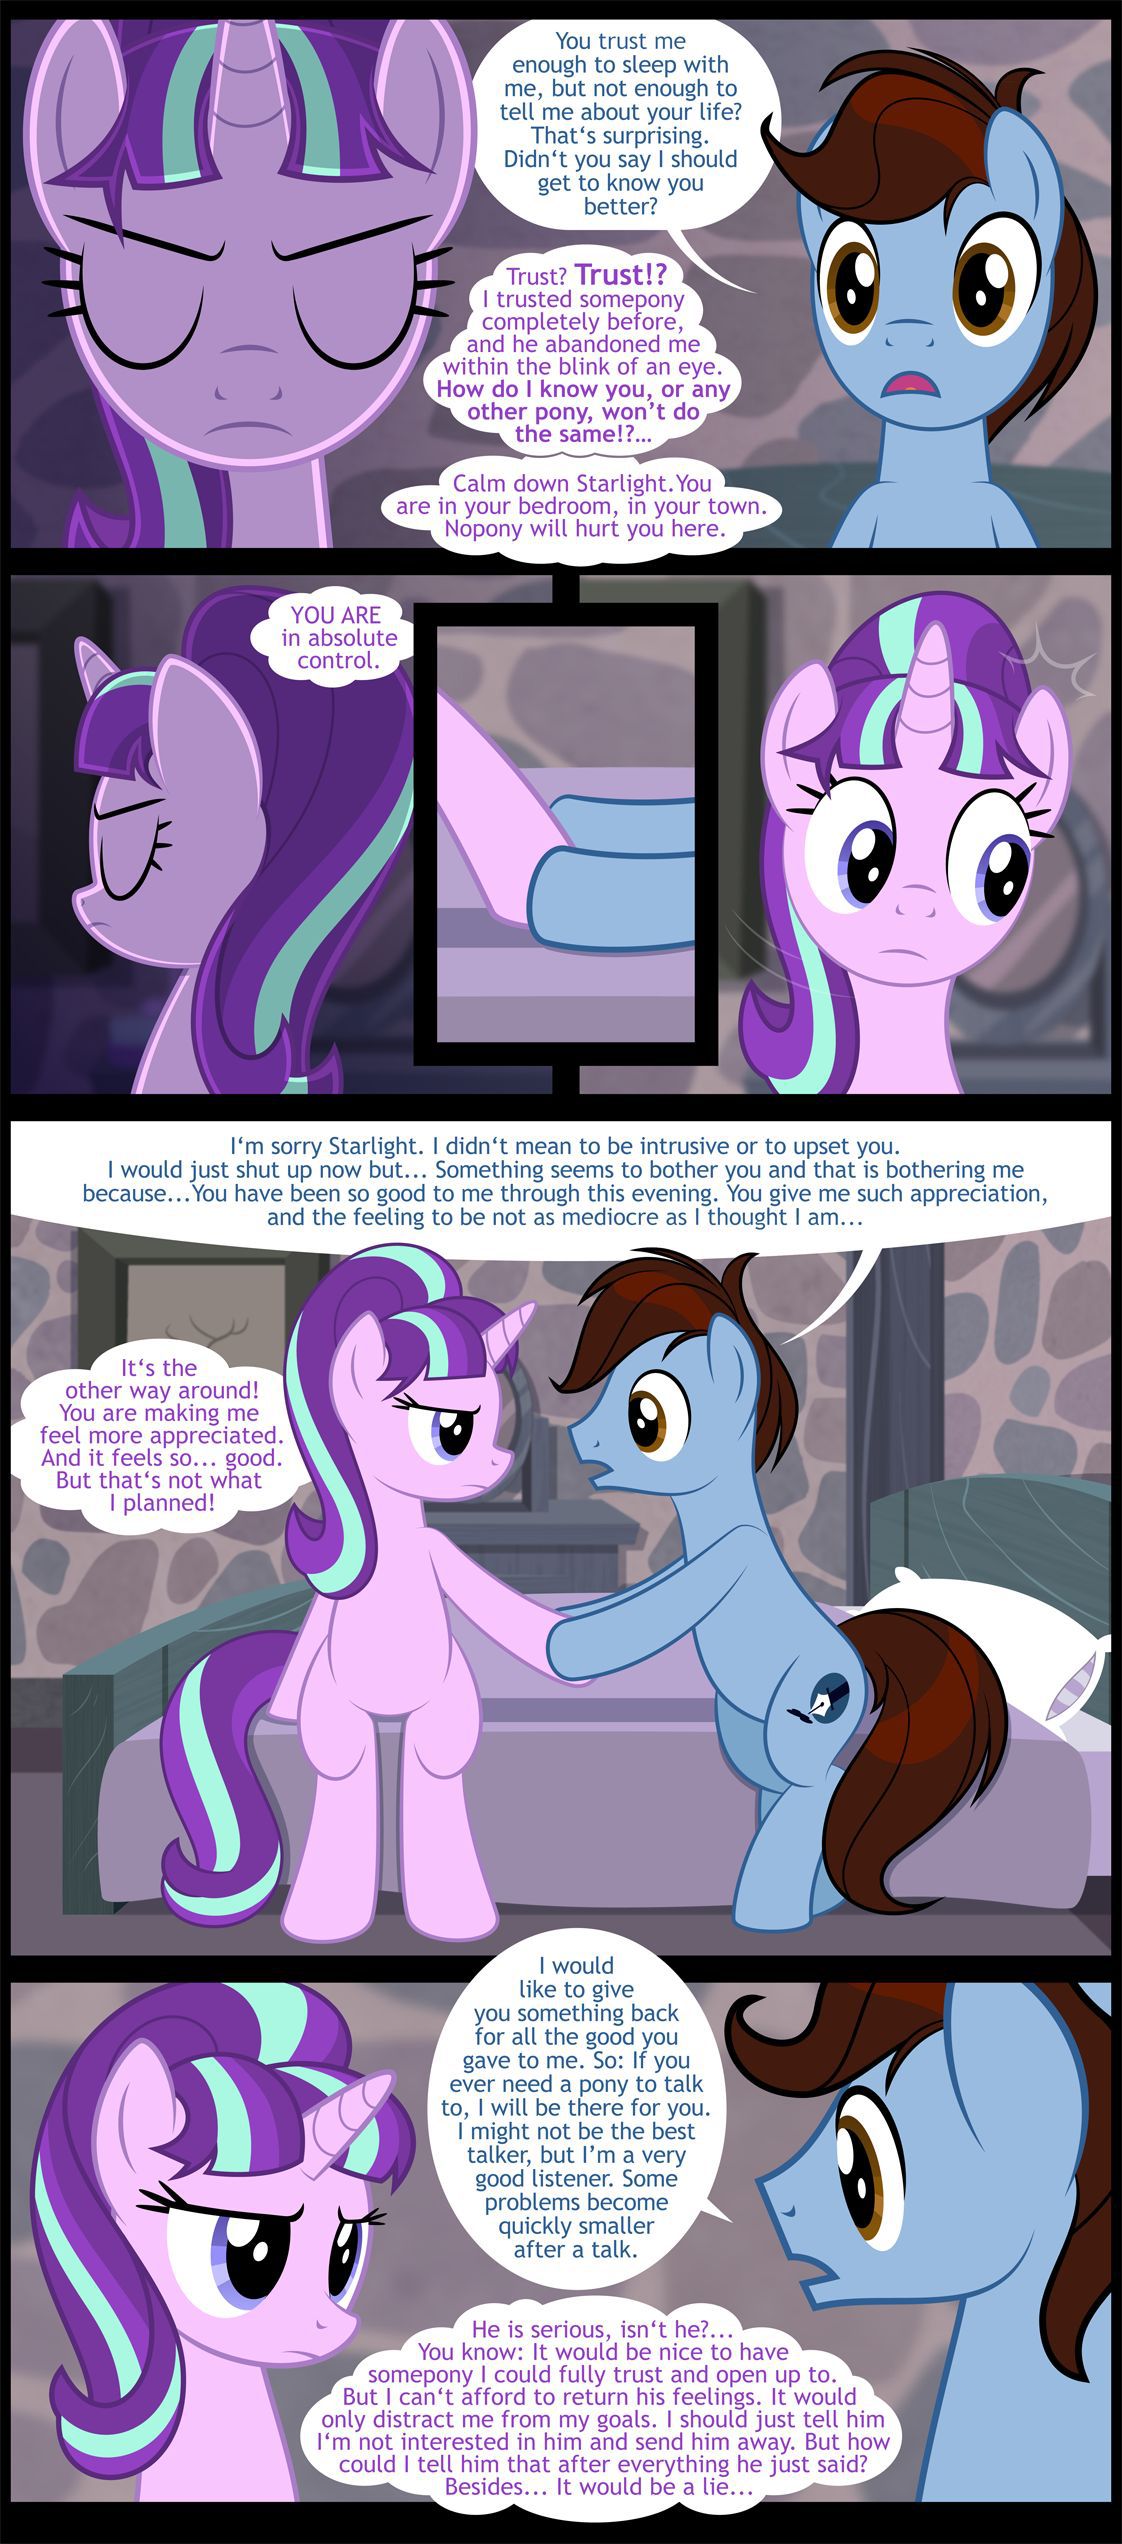 [Culu-Bluebeaver] The Newcomer (My Little Pony: Friendship is Magic) 14